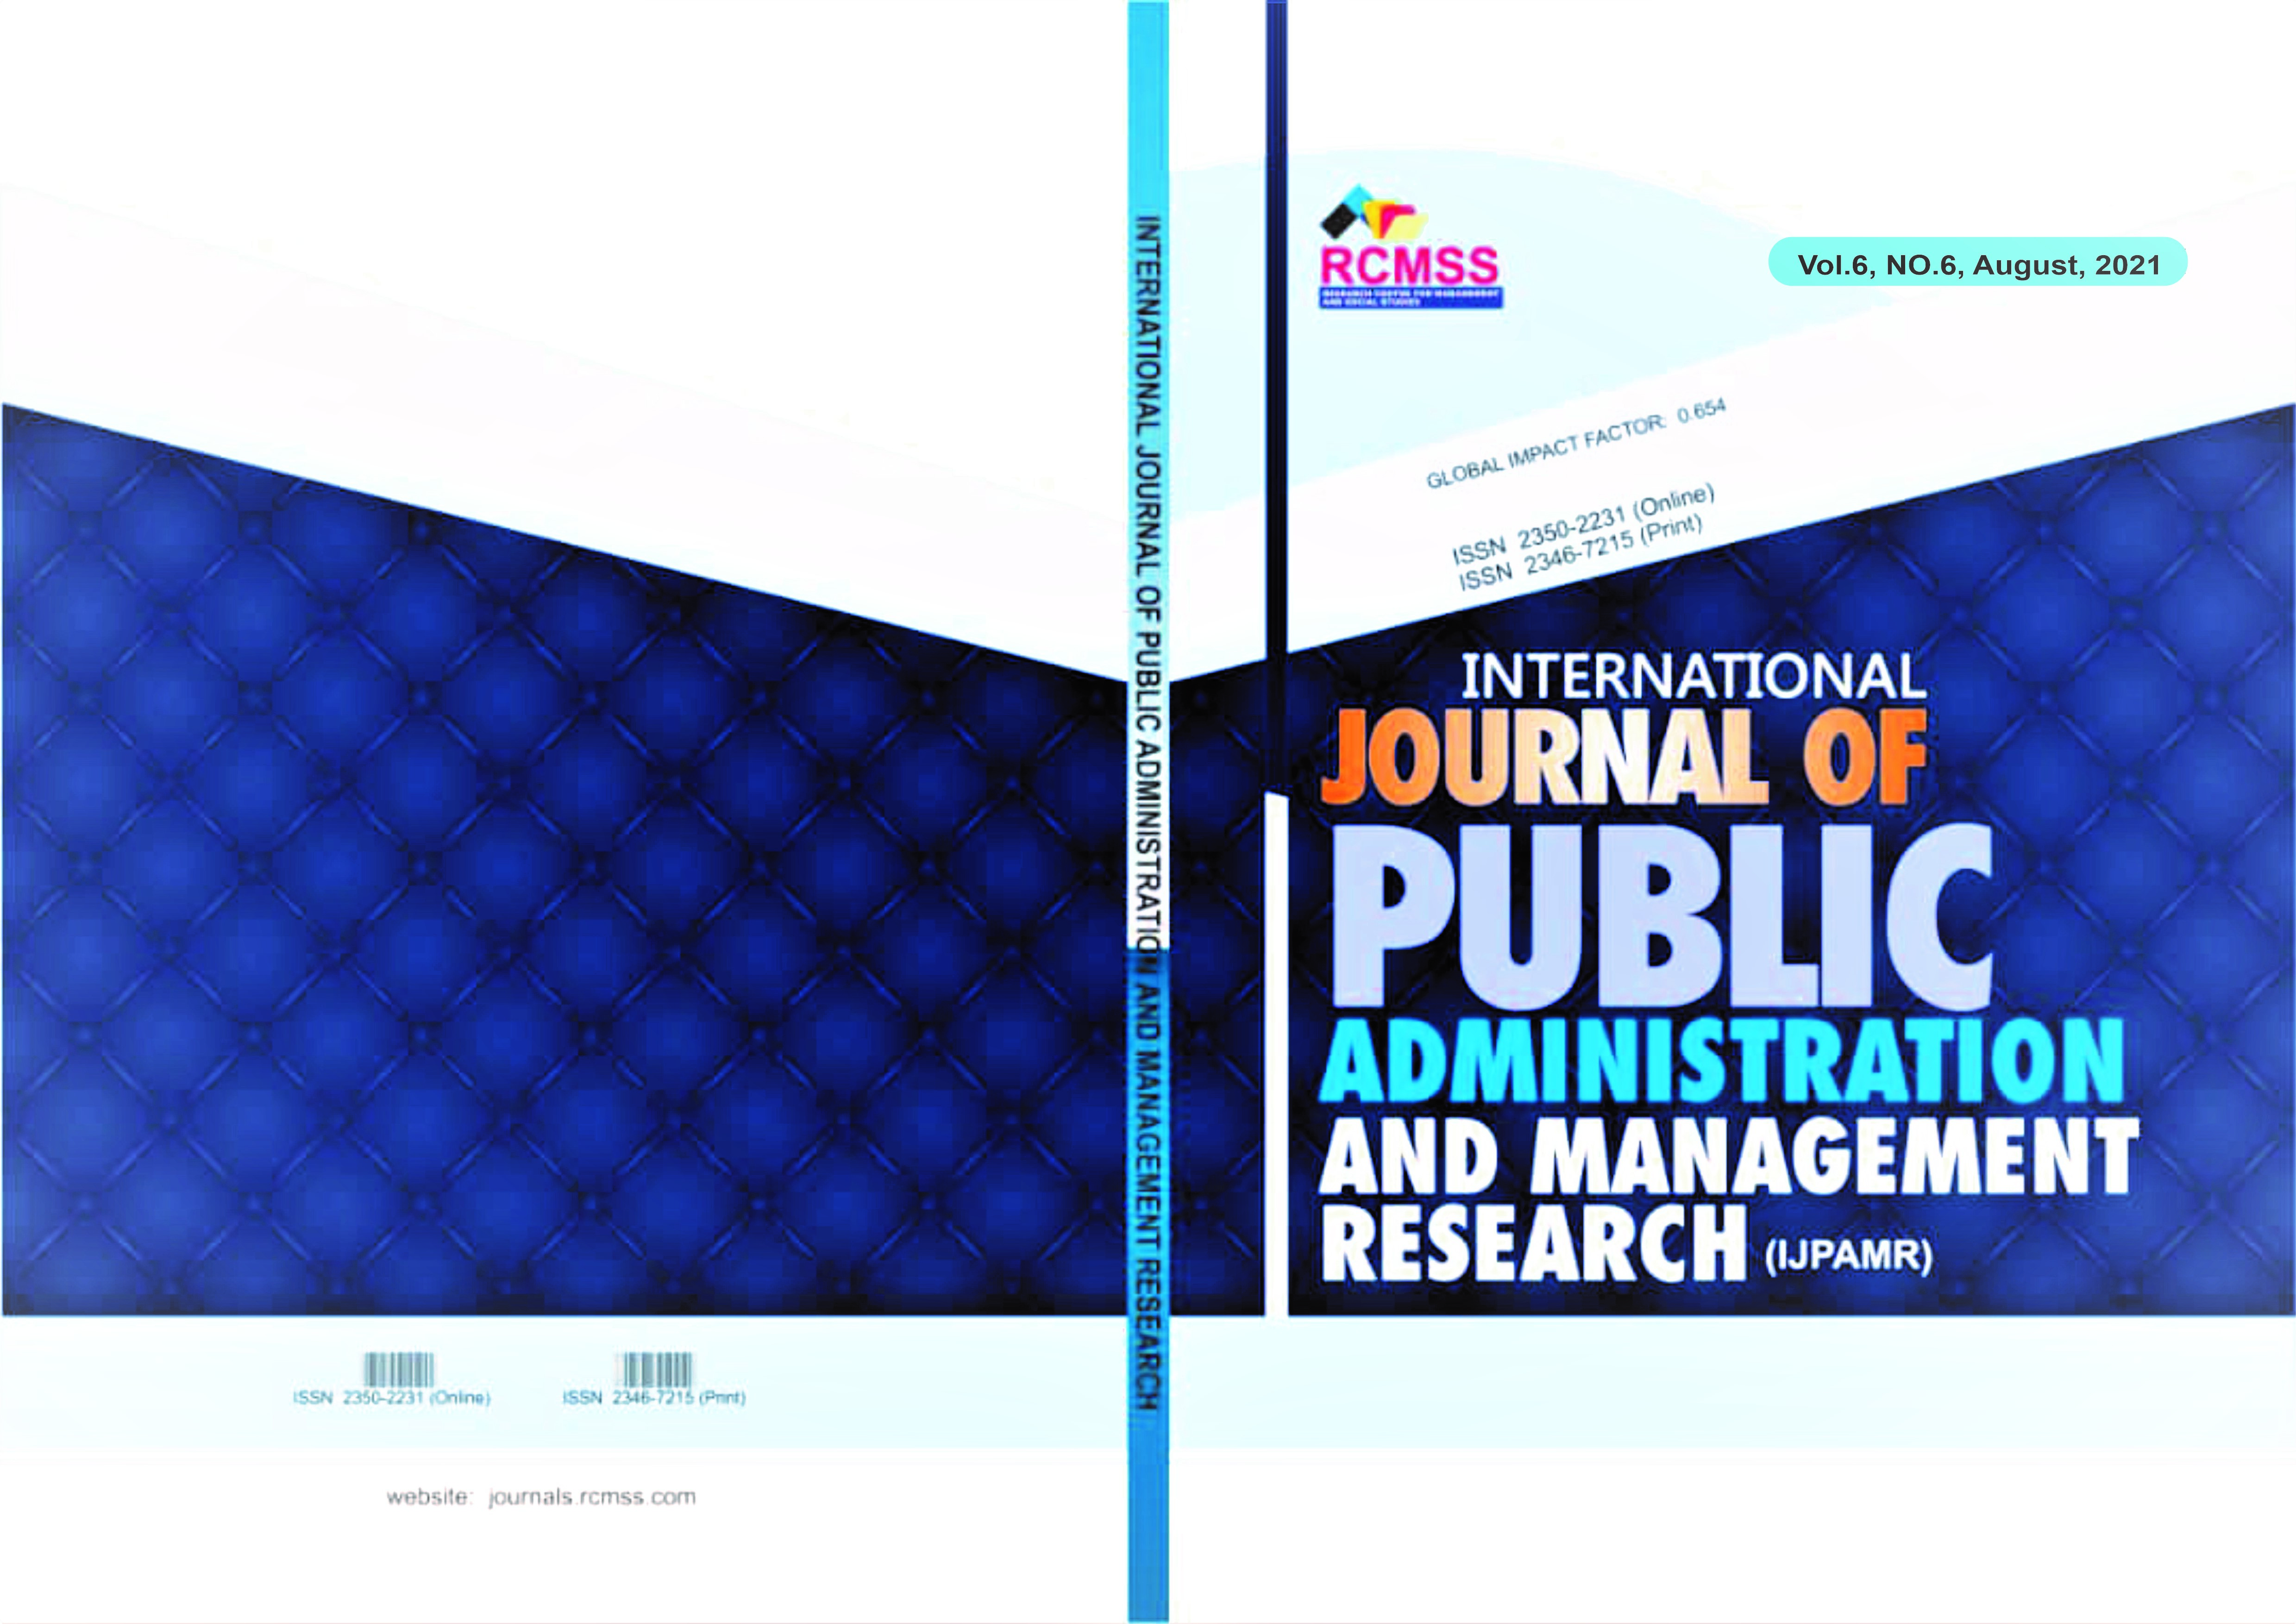 					View Vol. 6 No. 6 (2021): International Journal of Public Administration and Management Research (IJPAMR)
				